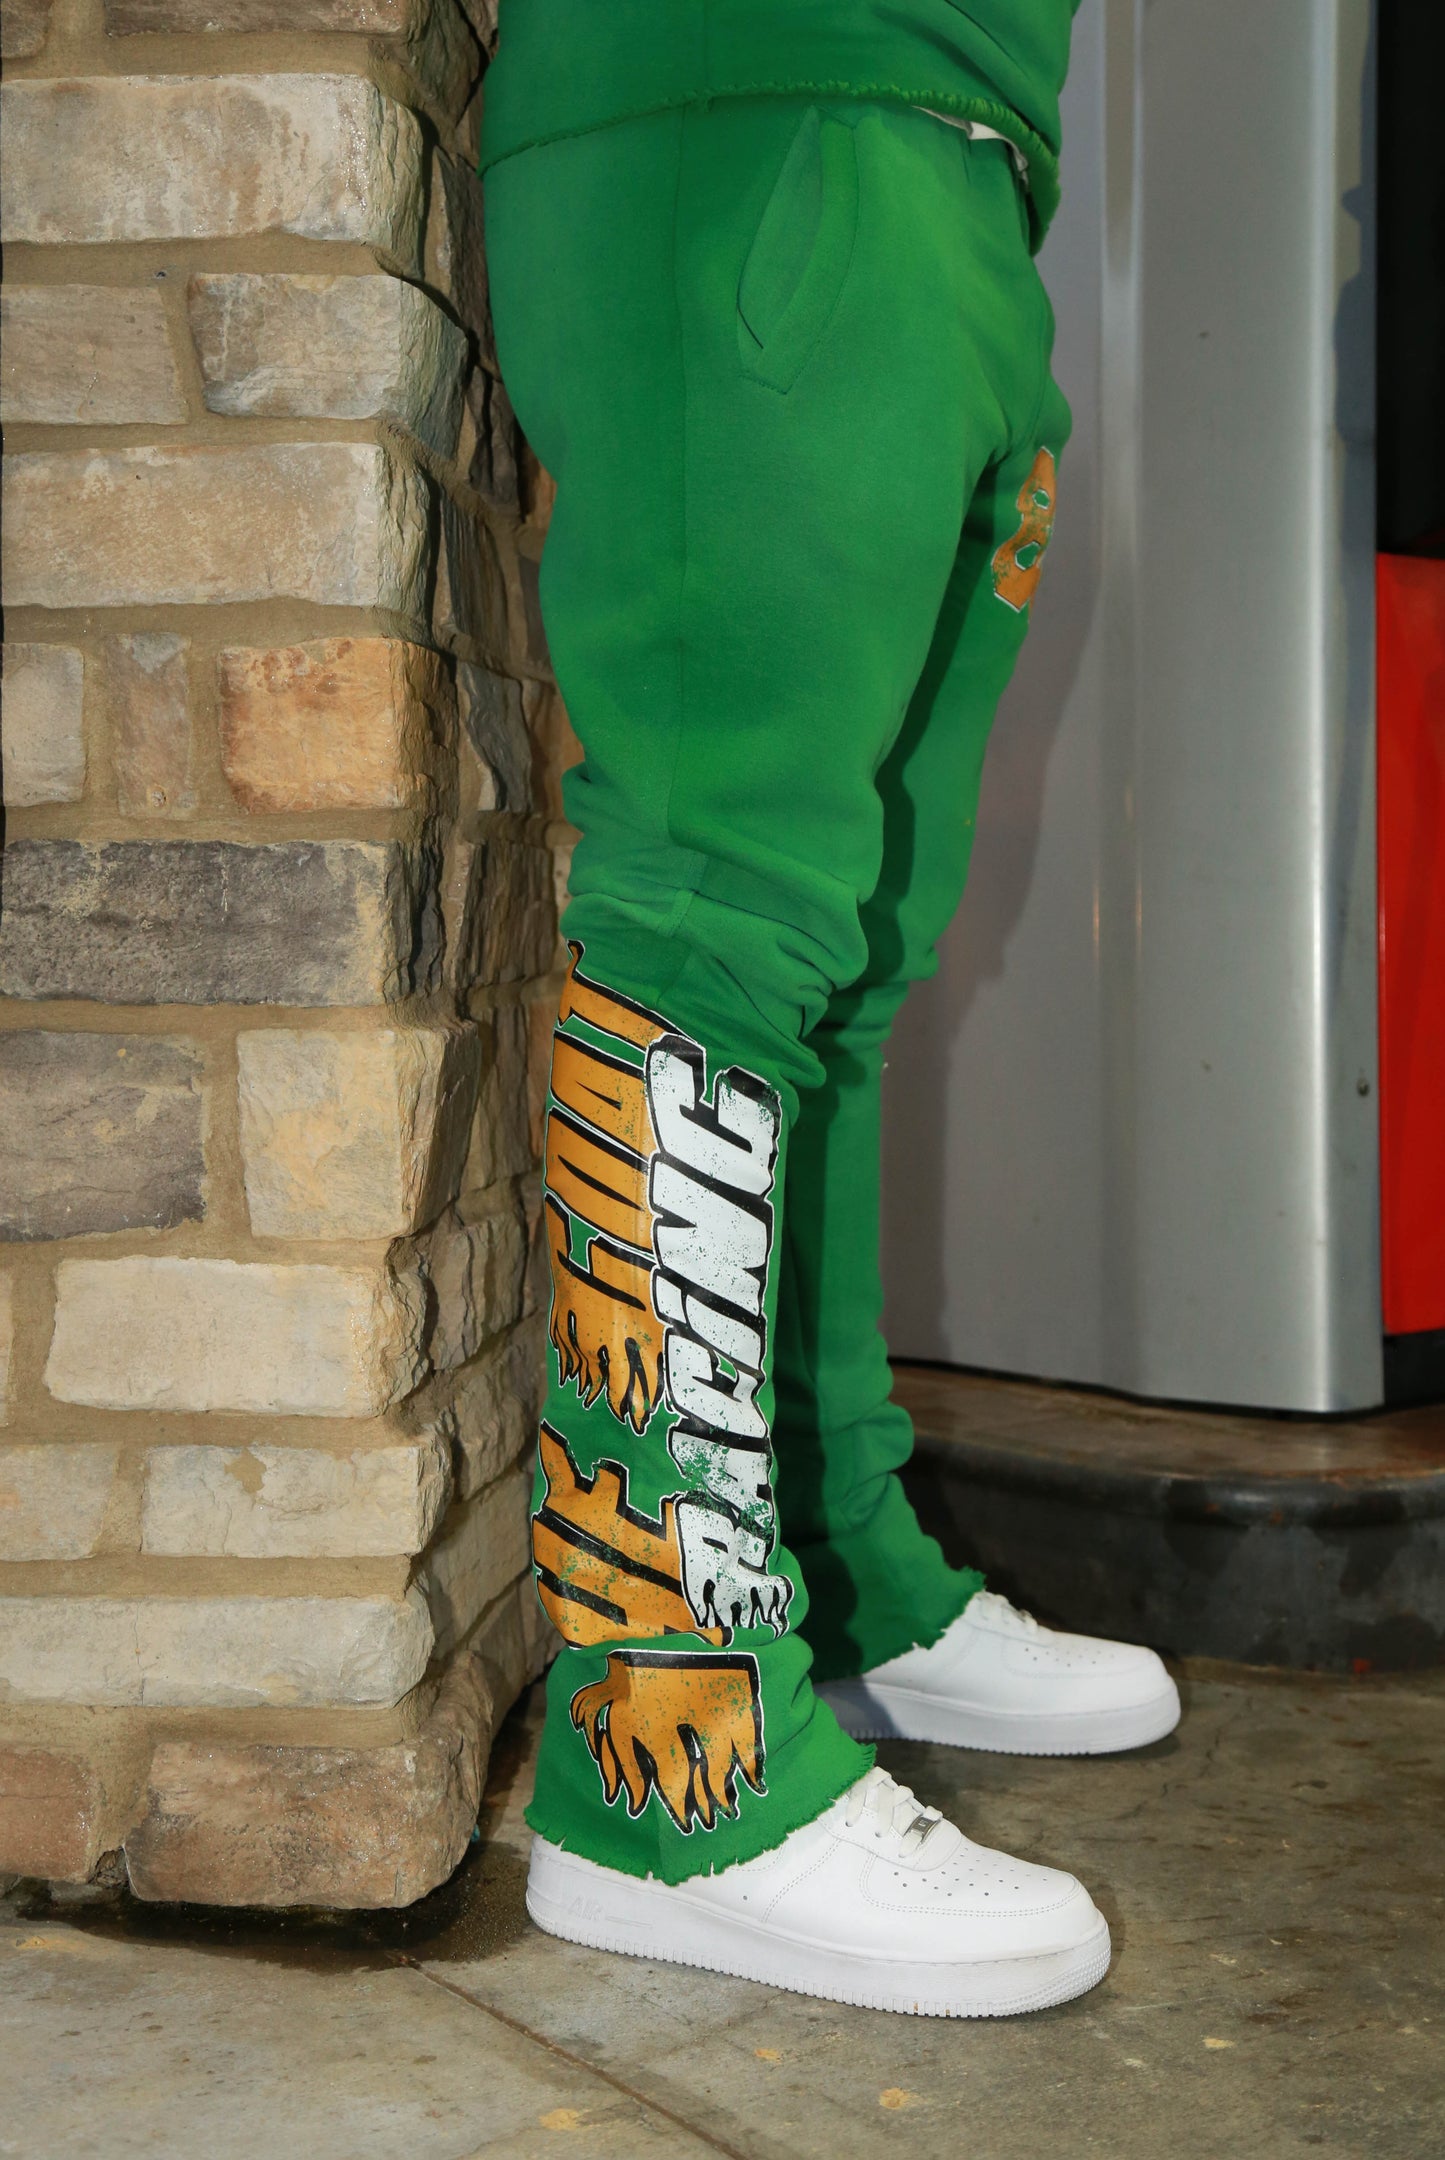 The G.O.A.T “RACING 2 THE MONEY” GREEN/YELLOW/WHITE Hoodie & Jogger set